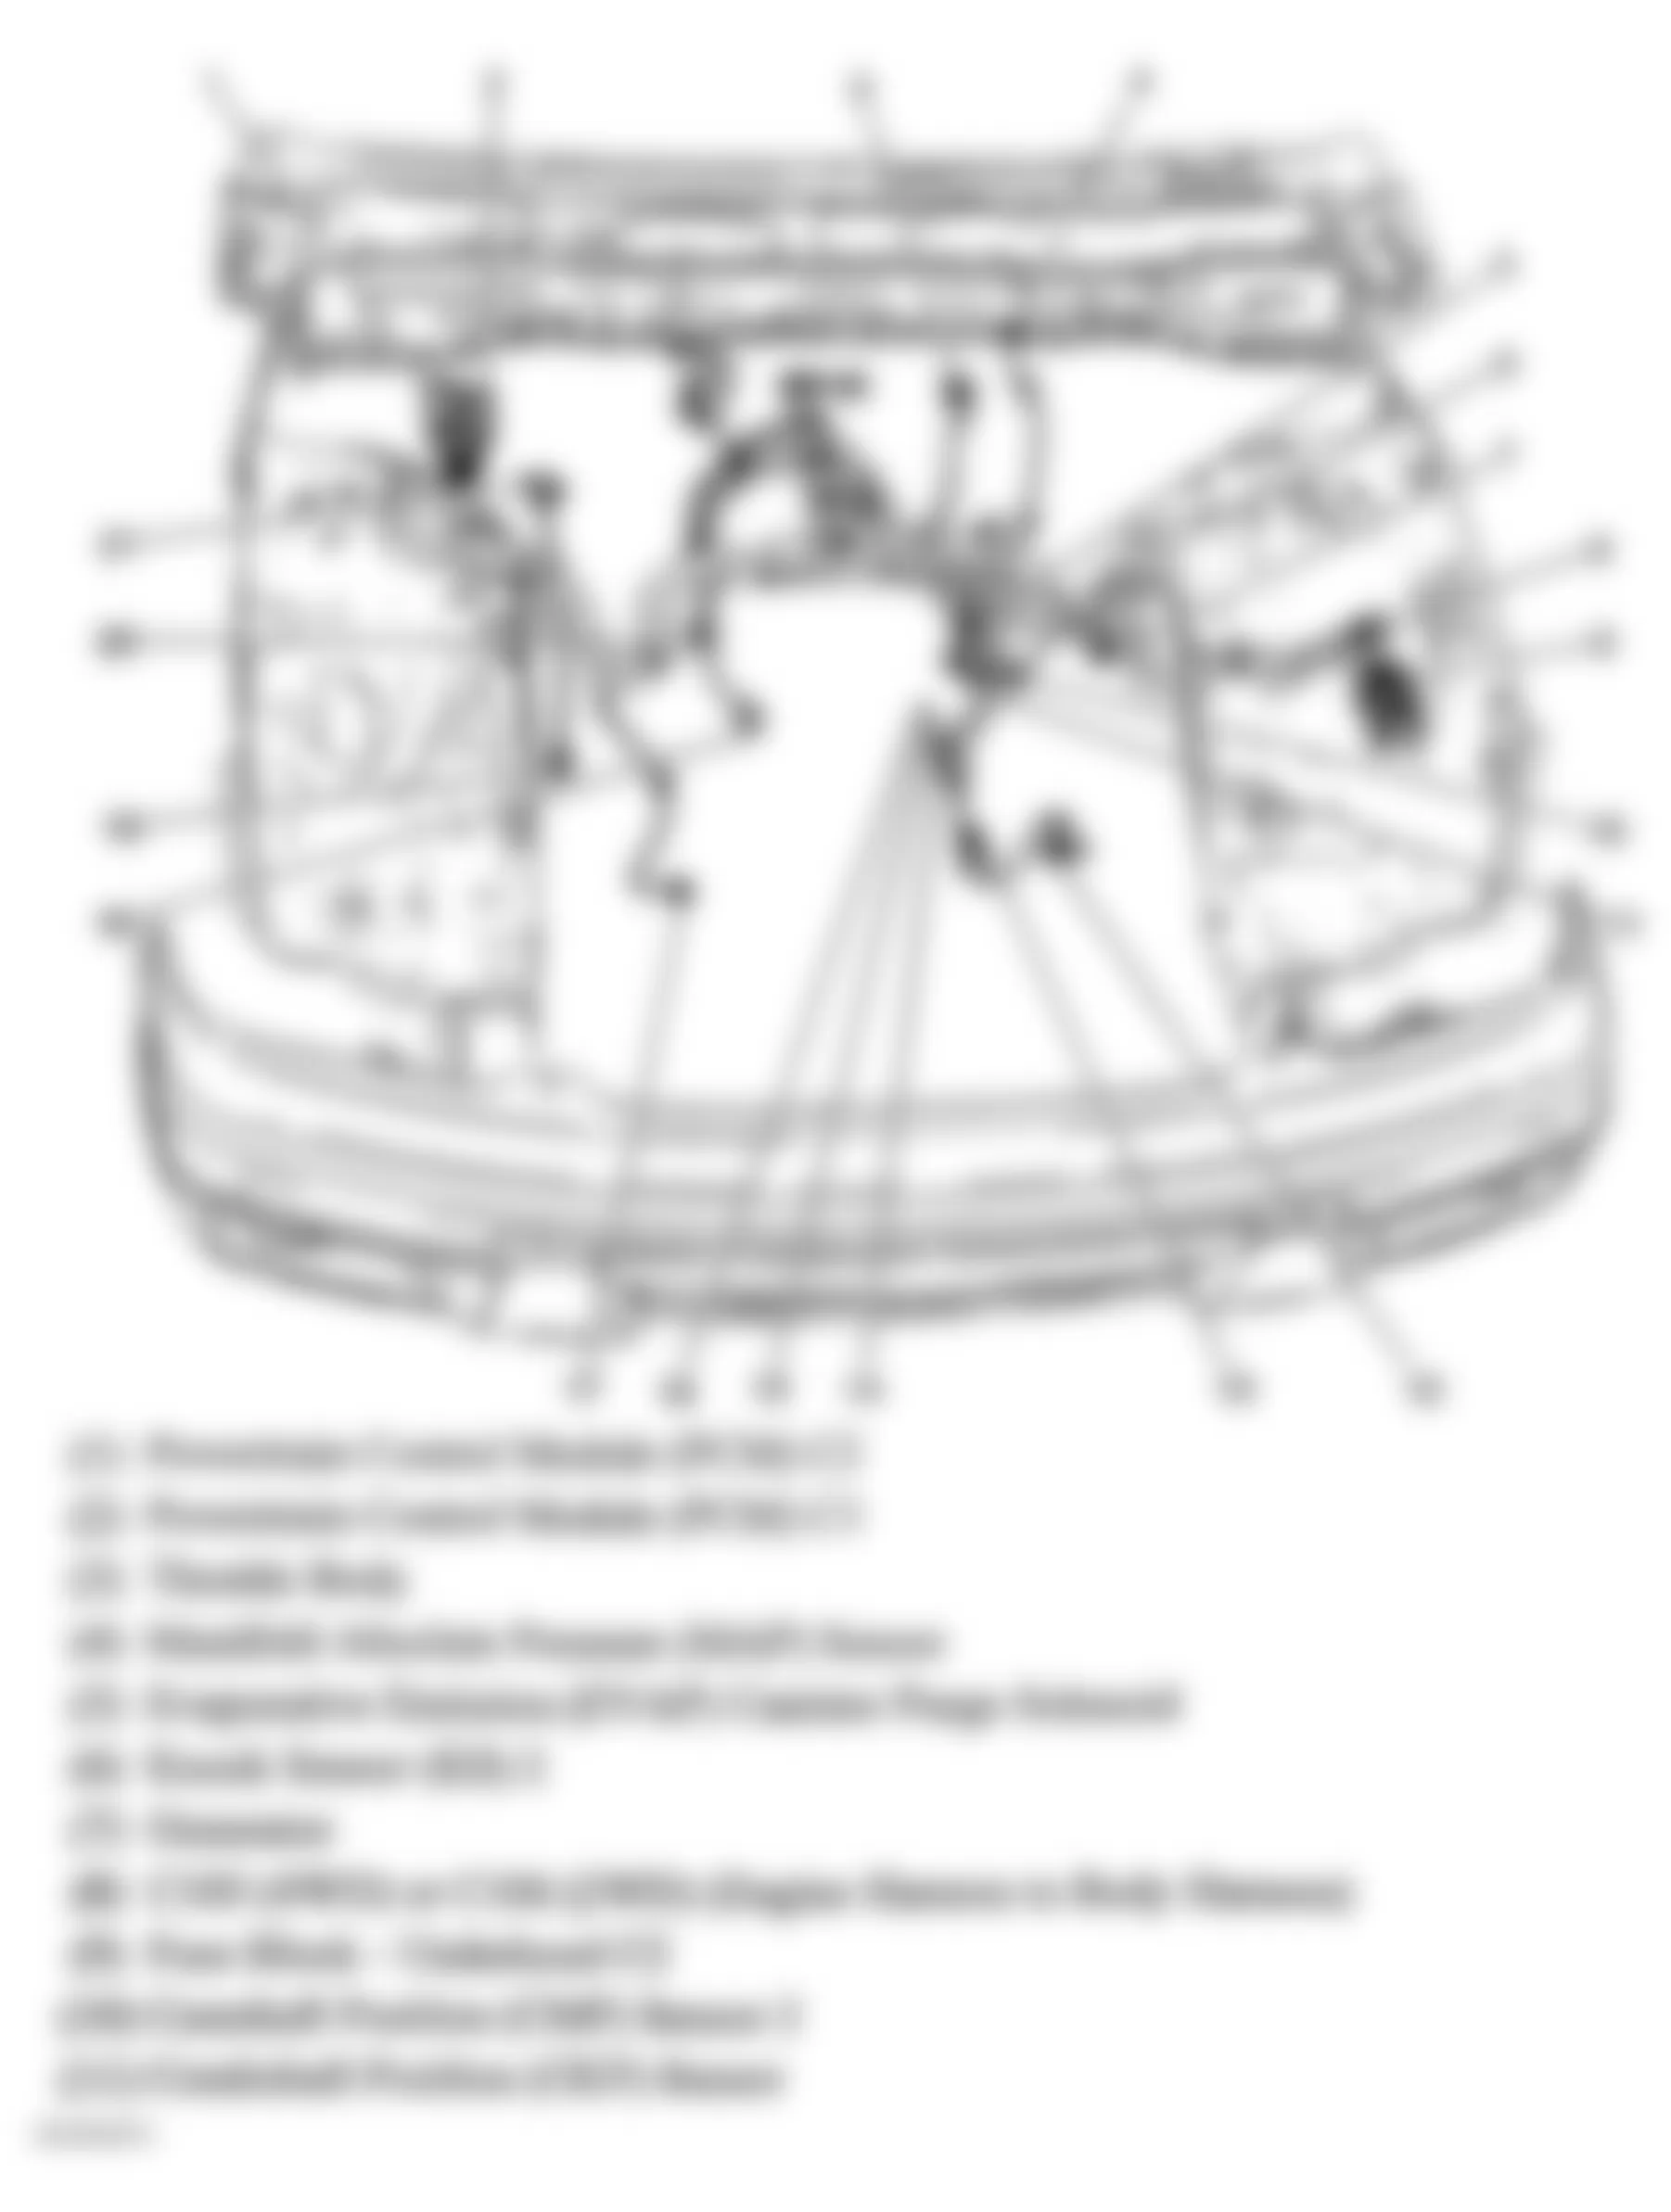 Chevrolet Colorado 2005 - Component Locations -  Left Side Of Engine (3.5L) (1 Of 2)